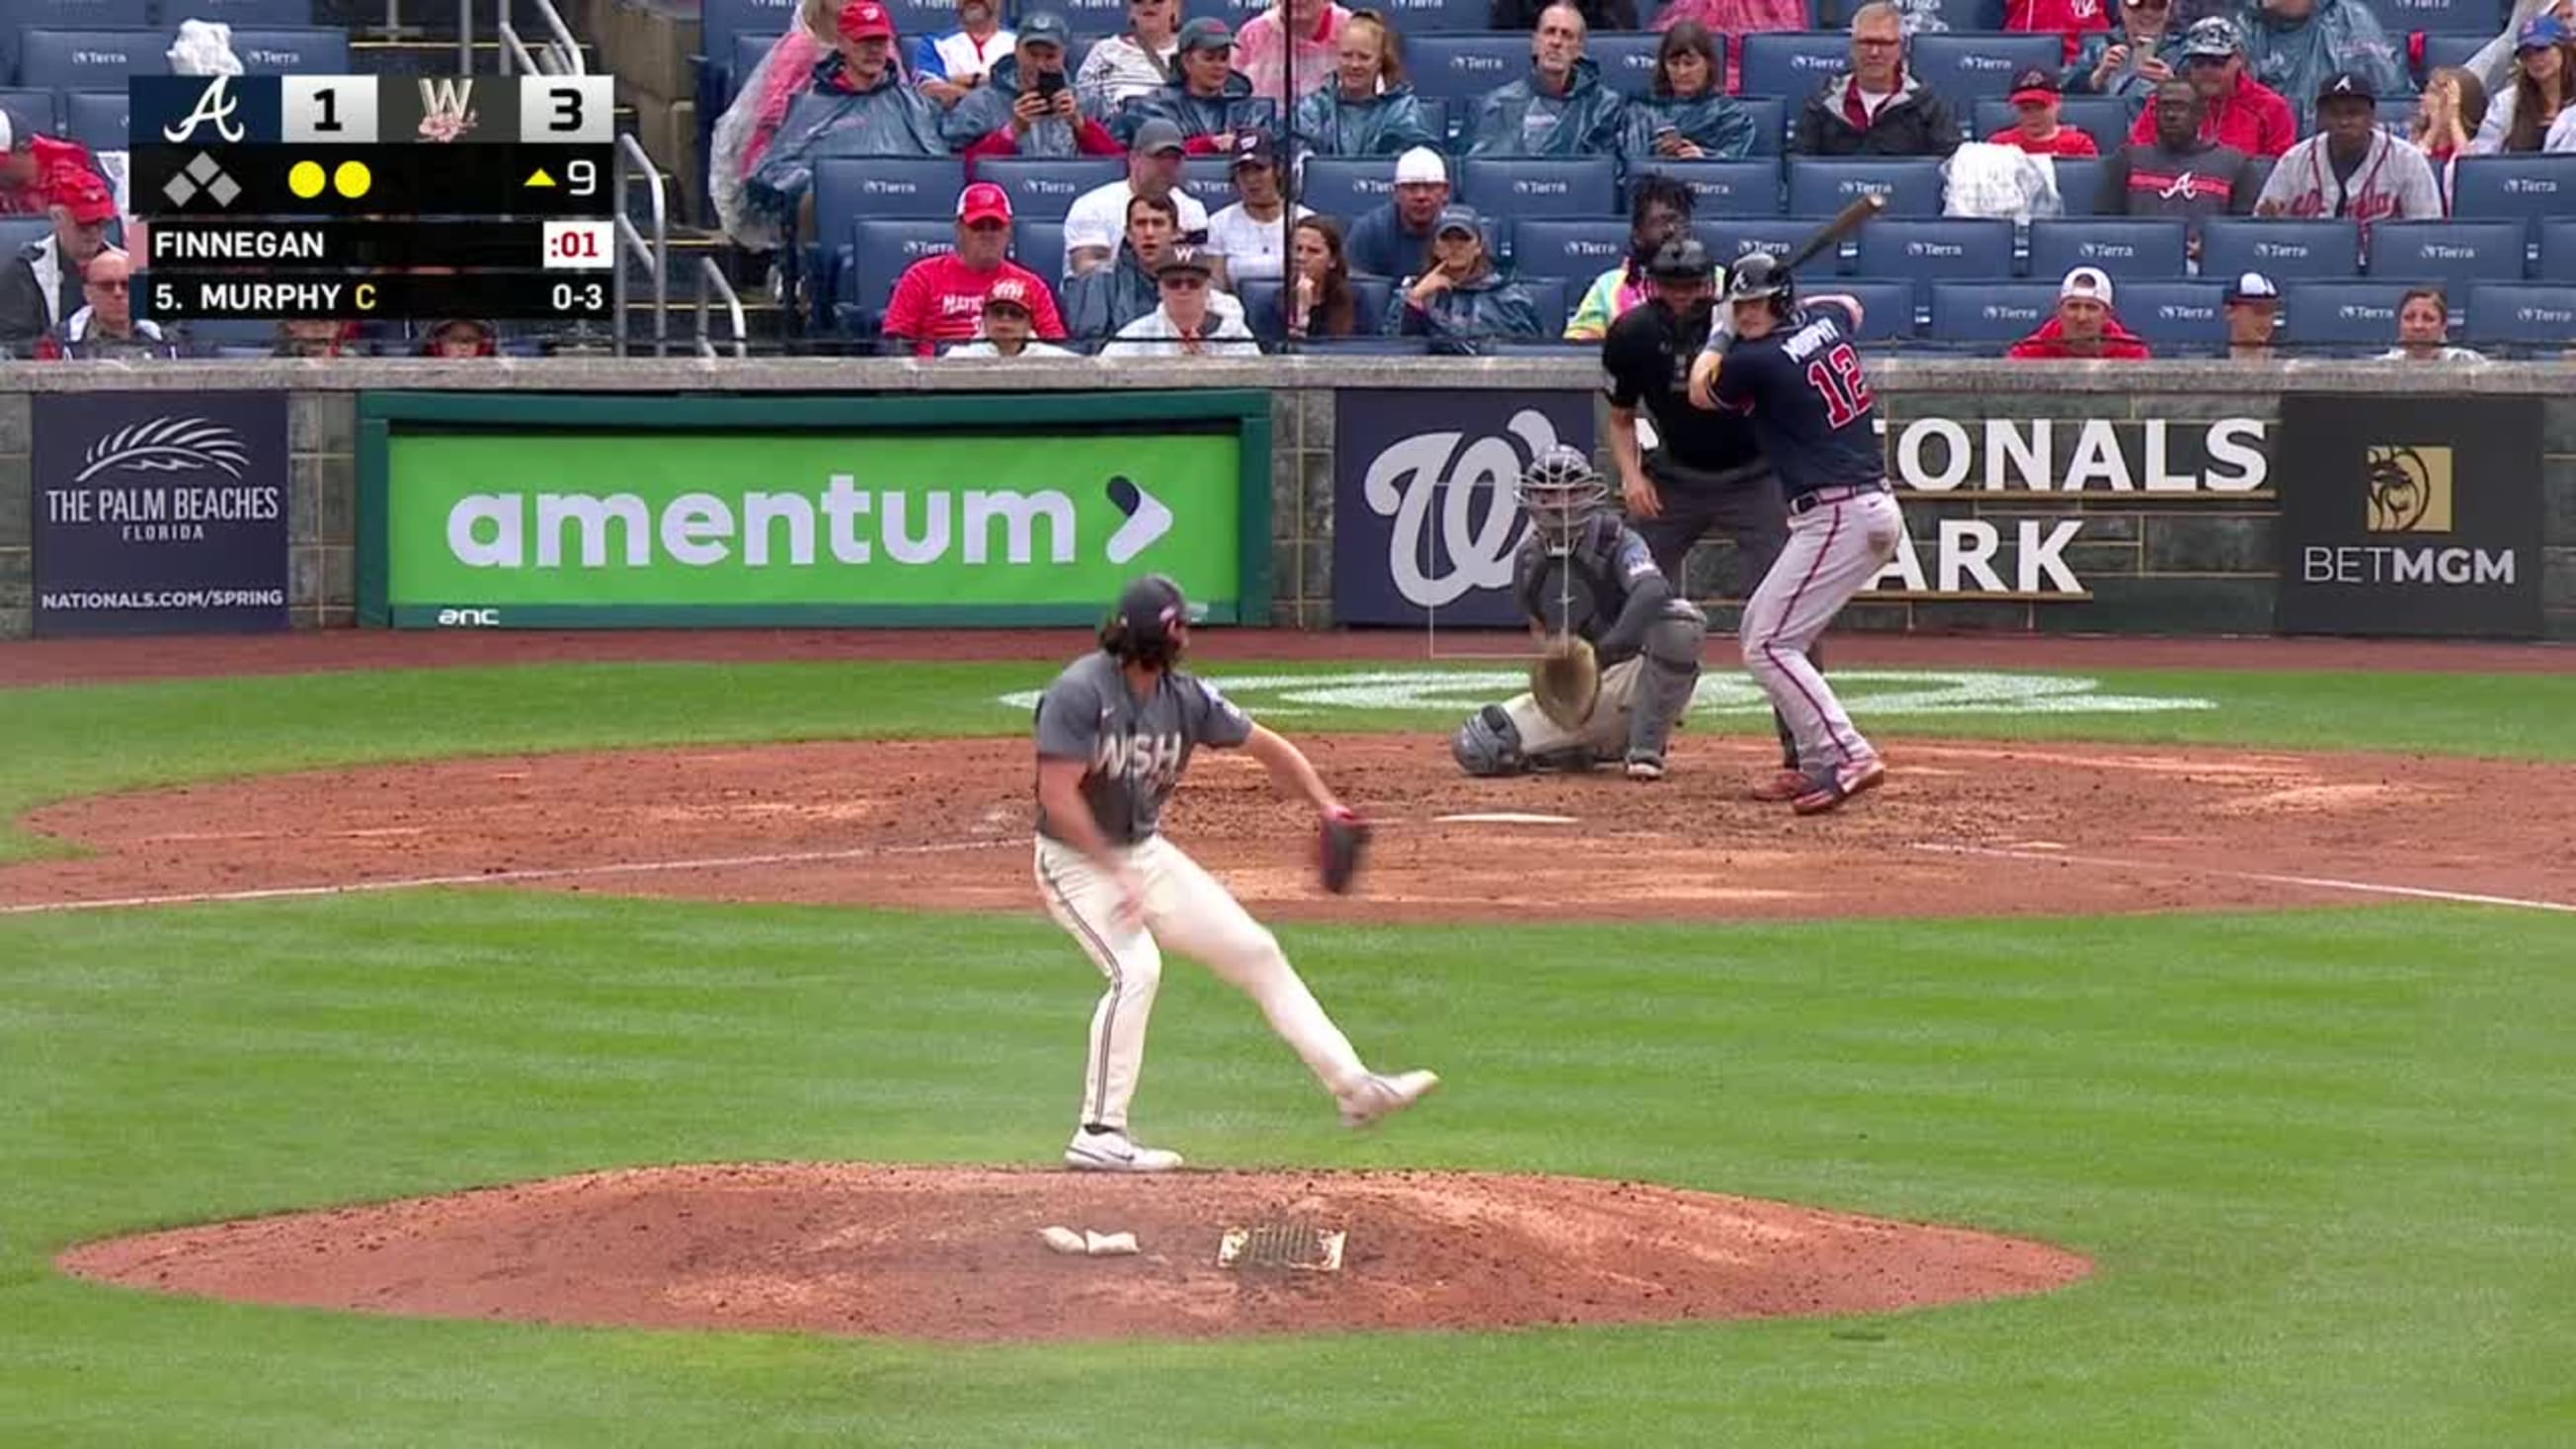 Highlight] Sean Murphy's 3-run homer brings the Braves within five